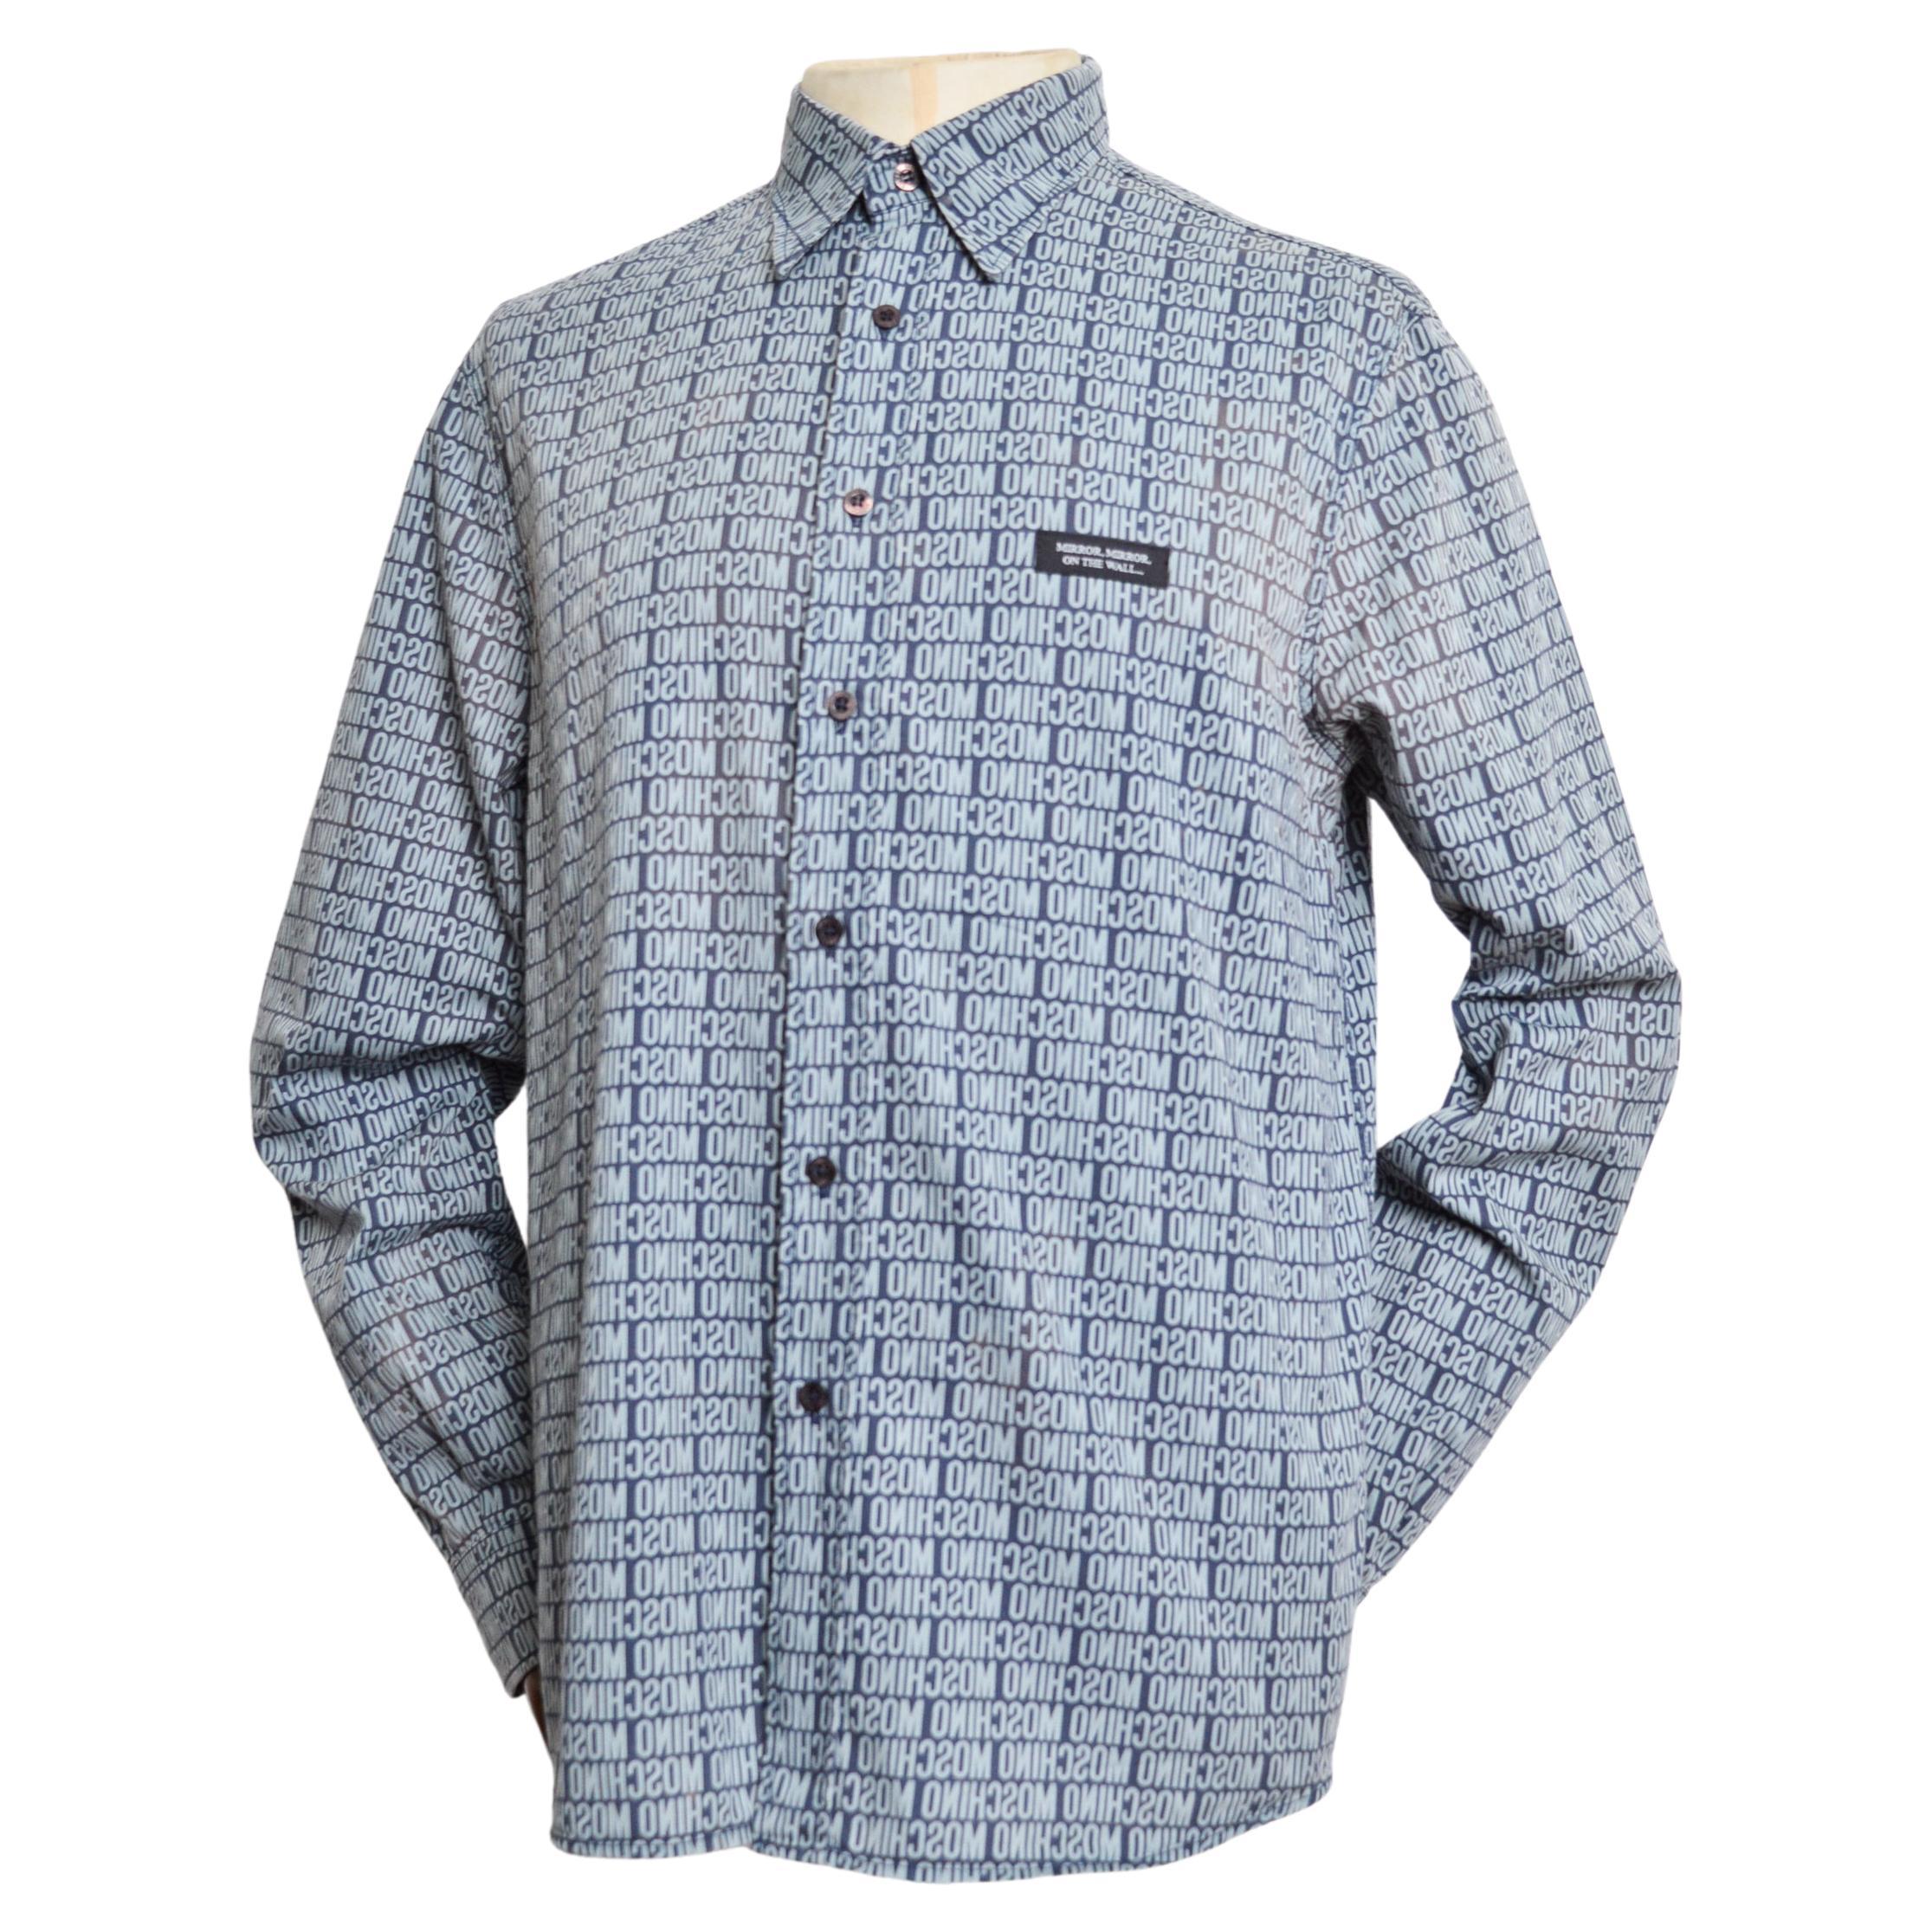 Early 2000's UK Garage Era 'MOSCHINO' repeat pattern Long sleeve Shirt, crafted from a printed cotton in Pale blue & Mid blue shades.

MADE IN ITALY.   

Features: Reverse mirror effect print, button down front , Collar, Long sleeves, cuffs,